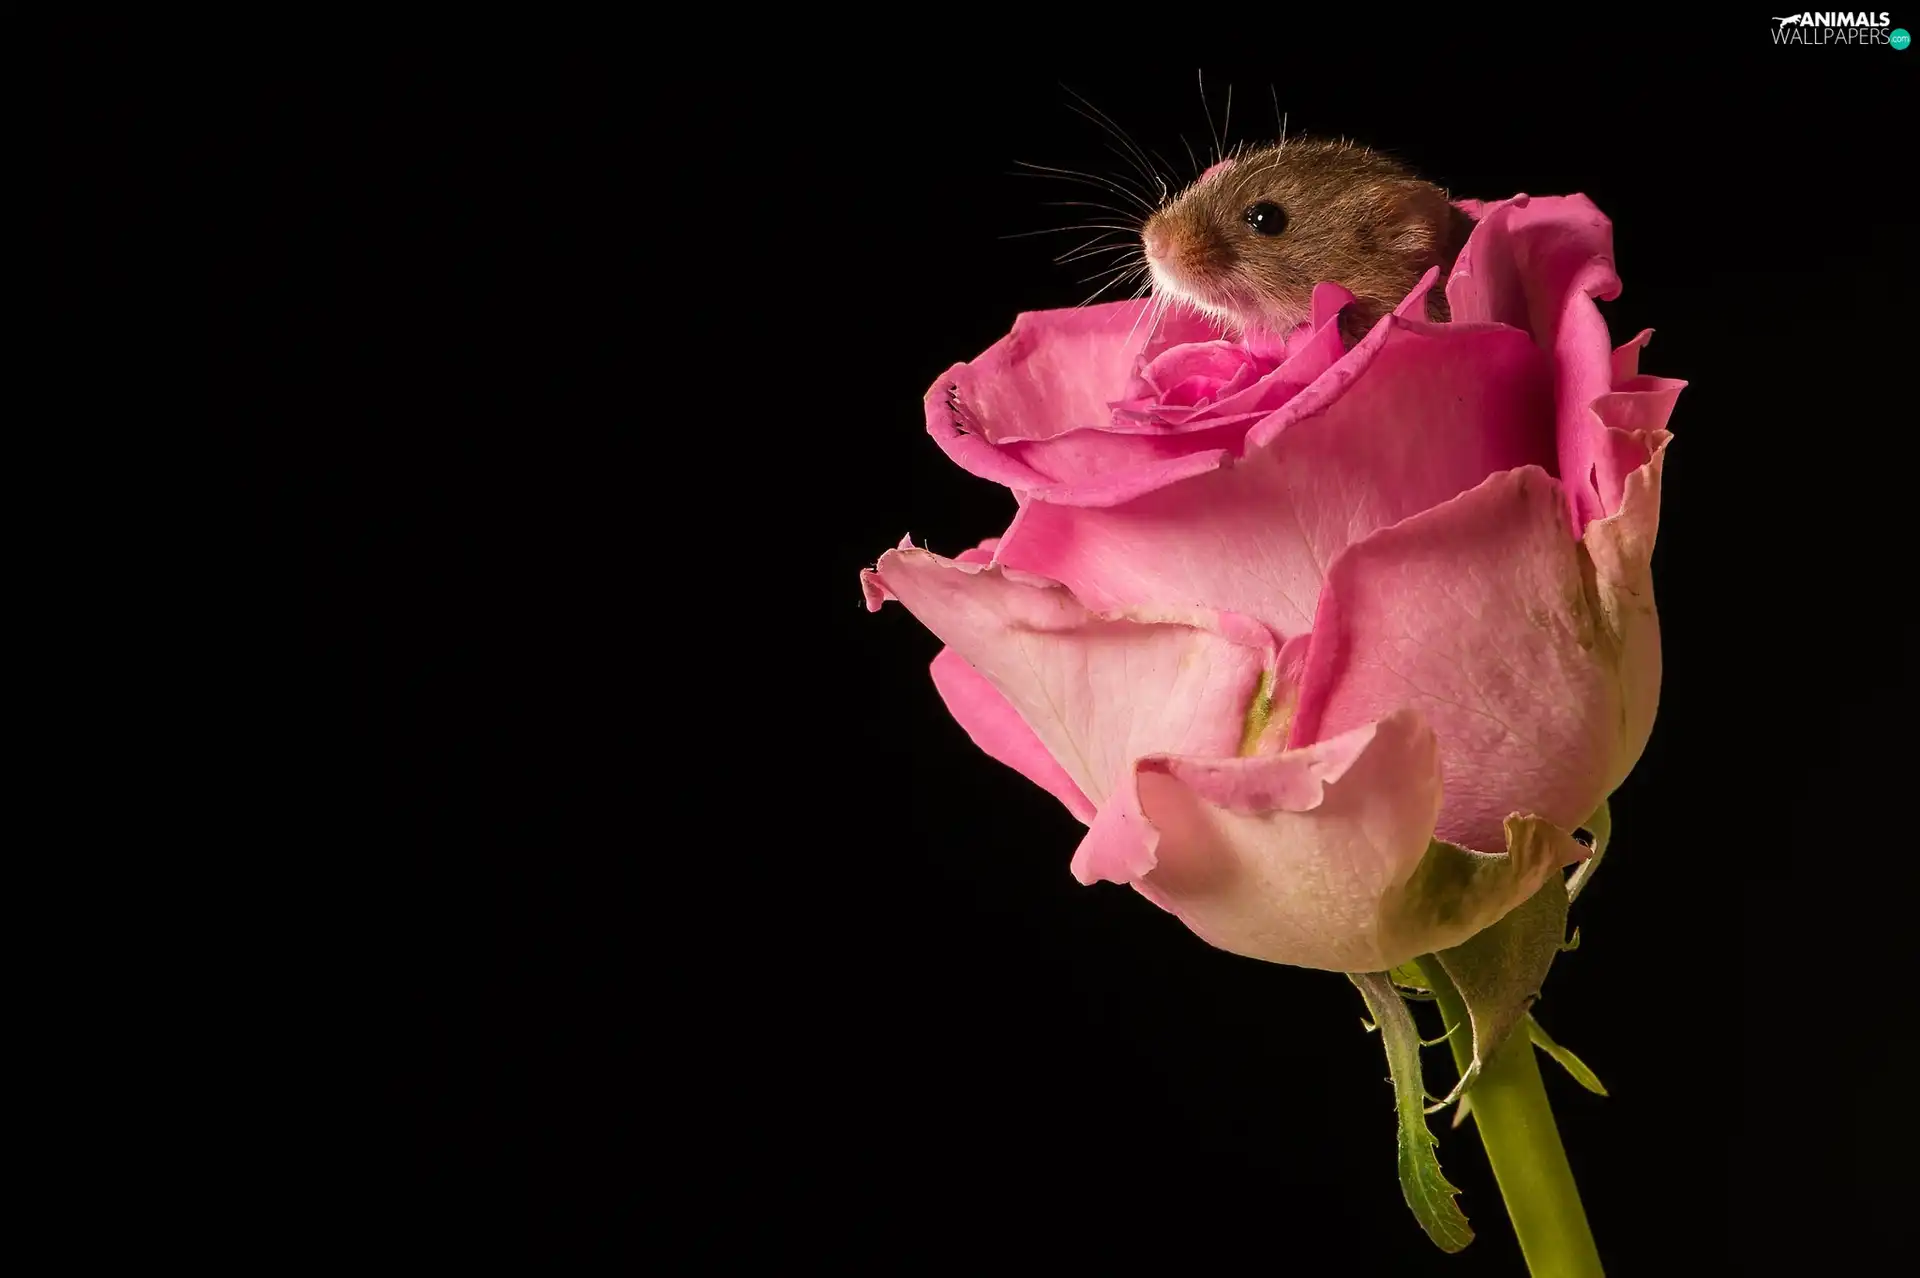 Colourfull Flowers, Pink, mouse, mouse, small, rose